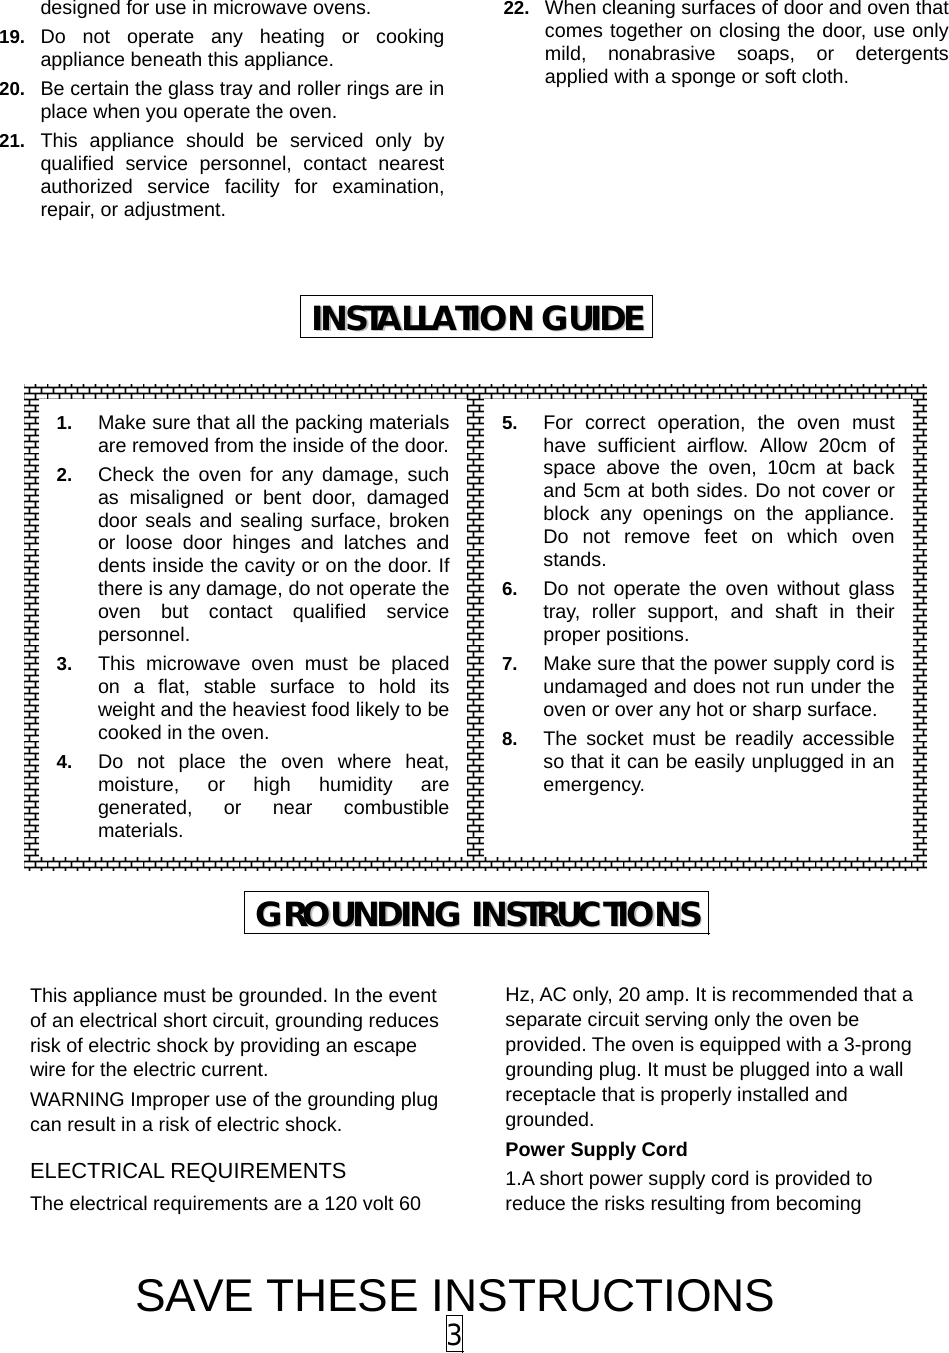 SAVE THESE INSTRUCTIONS 3 designed for use in microwave ovens. 19.  Do not operate any heating or cooking appliance beneath this appliance. 20.  Be certain the glass tray and roller rings are in place when you operate the oven. 21.  This appliance should be serviced only by qualified service personnel, contact nearest authorized service facility for examination, repair, or adjustment. 22.  When cleaning surfaces of door and oven that comes together on closing the door, use only mild, nonabrasive soaps, or detergents applied with a sponge or soft cloth.                        This appliance must be grounded. In the event of an electrical short circuit, grounding reduces risk of electric shock by providing an escape wire for the electric current.   WARNING Improper use of the grounding plug can result in a risk of electric shock. ELECTRICAL REQUIREMENTS The electrical requirements are a 120 volt 60 Hz, AC only, 20 amp. It is recommended that a separate circuit serving only the oven be provided. The oven is equipped with a 3-prong grounding plug. It must be plugged into a wall receptacle that is properly installed and grounded.  Power Supply Cord 1.A short power supply cord is provided to reduce the risks resulting from becoming IINNSSTTAALLLLAATTIIOONN  GGUUIIDDEE  GGRROOUUNNDDIINNGG  IINNSSTTRRUUCCTTIIOONNSS  1.  Make sure that all the packing materials are removed from the inside of the door.2.  Check the oven for any damage, such as misaligned or bent door, damaged door seals and sealing surface, broken or loose door hinges and latches and dents inside the cavity or on the door. If there is any damage, do not operate the oven but contact qualified service personnel. 3.  This microwave oven must be placed on a flat, stable surface to hold its weight and the heaviest food likely to be cooked in the oven.   4.  Do not place the oven where heat, moisture, or high humidity are generated, or near combustible materials. 5.  For correct operation, the oven must have sufficient airflow. Allow 20cm of space above the oven, 10cm at back and 5cm at both sides. Do not cover or block any openings on the appliance. Do not remove feet on which oven stands. 6.  Do not operate the oven without glass tray, roller support, and shaft in their proper positions.   7.  Make sure that the power supply cord is undamaged and does not run under the oven or over any hot or sharp surface. 8.  The socket must be readily accessible so that it can be easily unplugged in an emergency. 